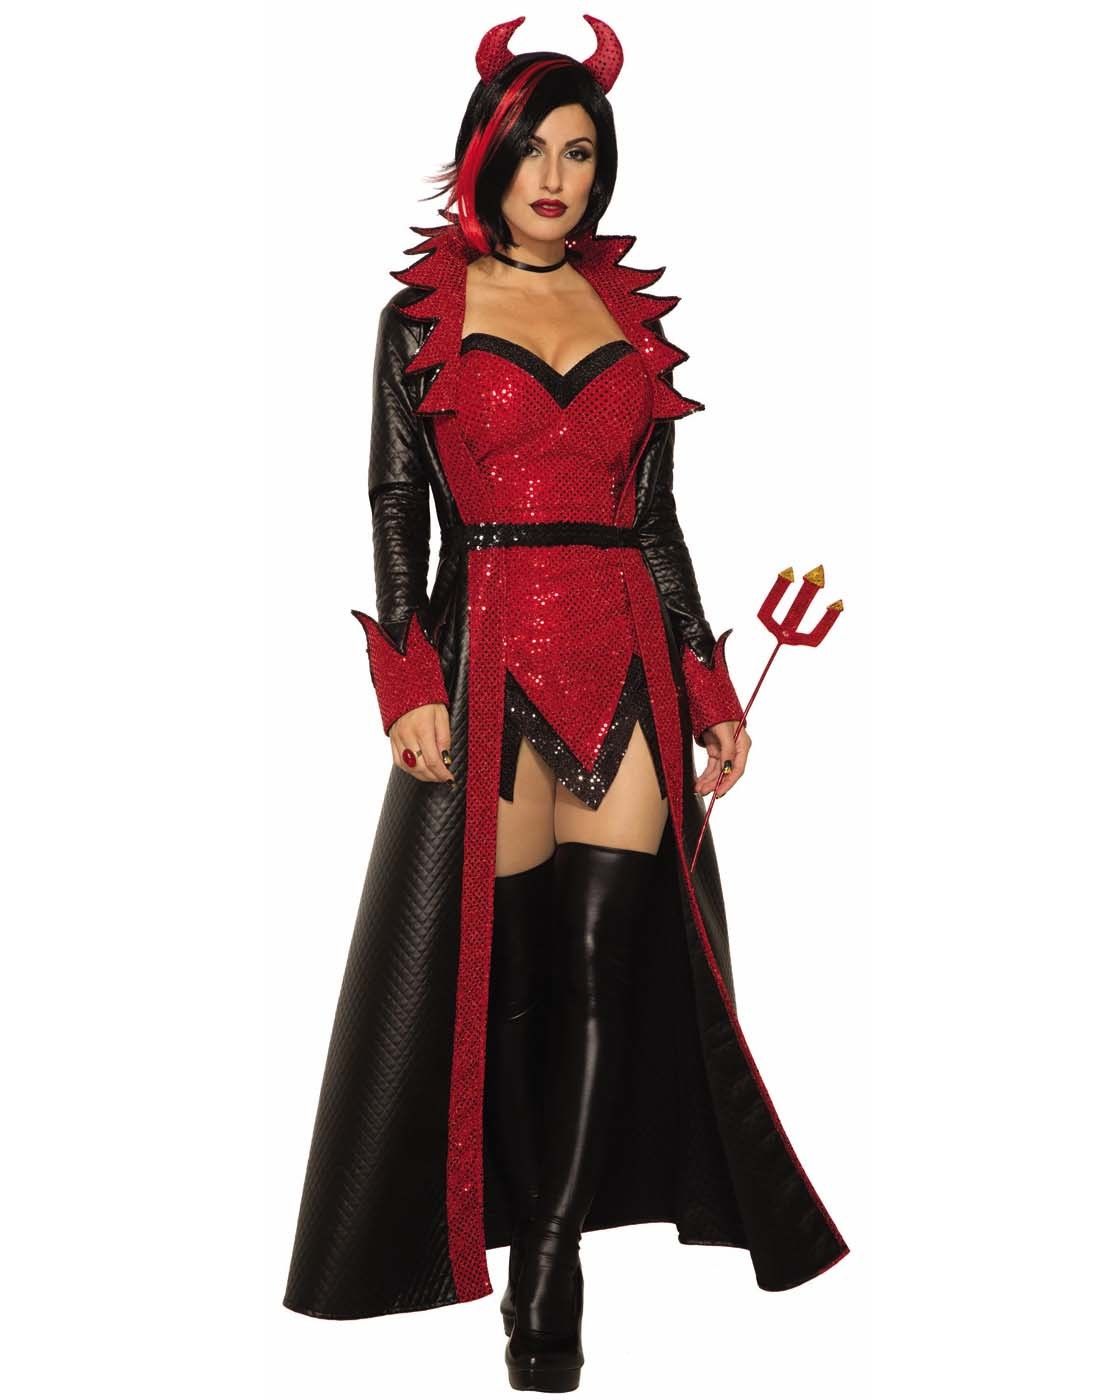 I might not like this costume, but it does give me an idea – A Succubi ...